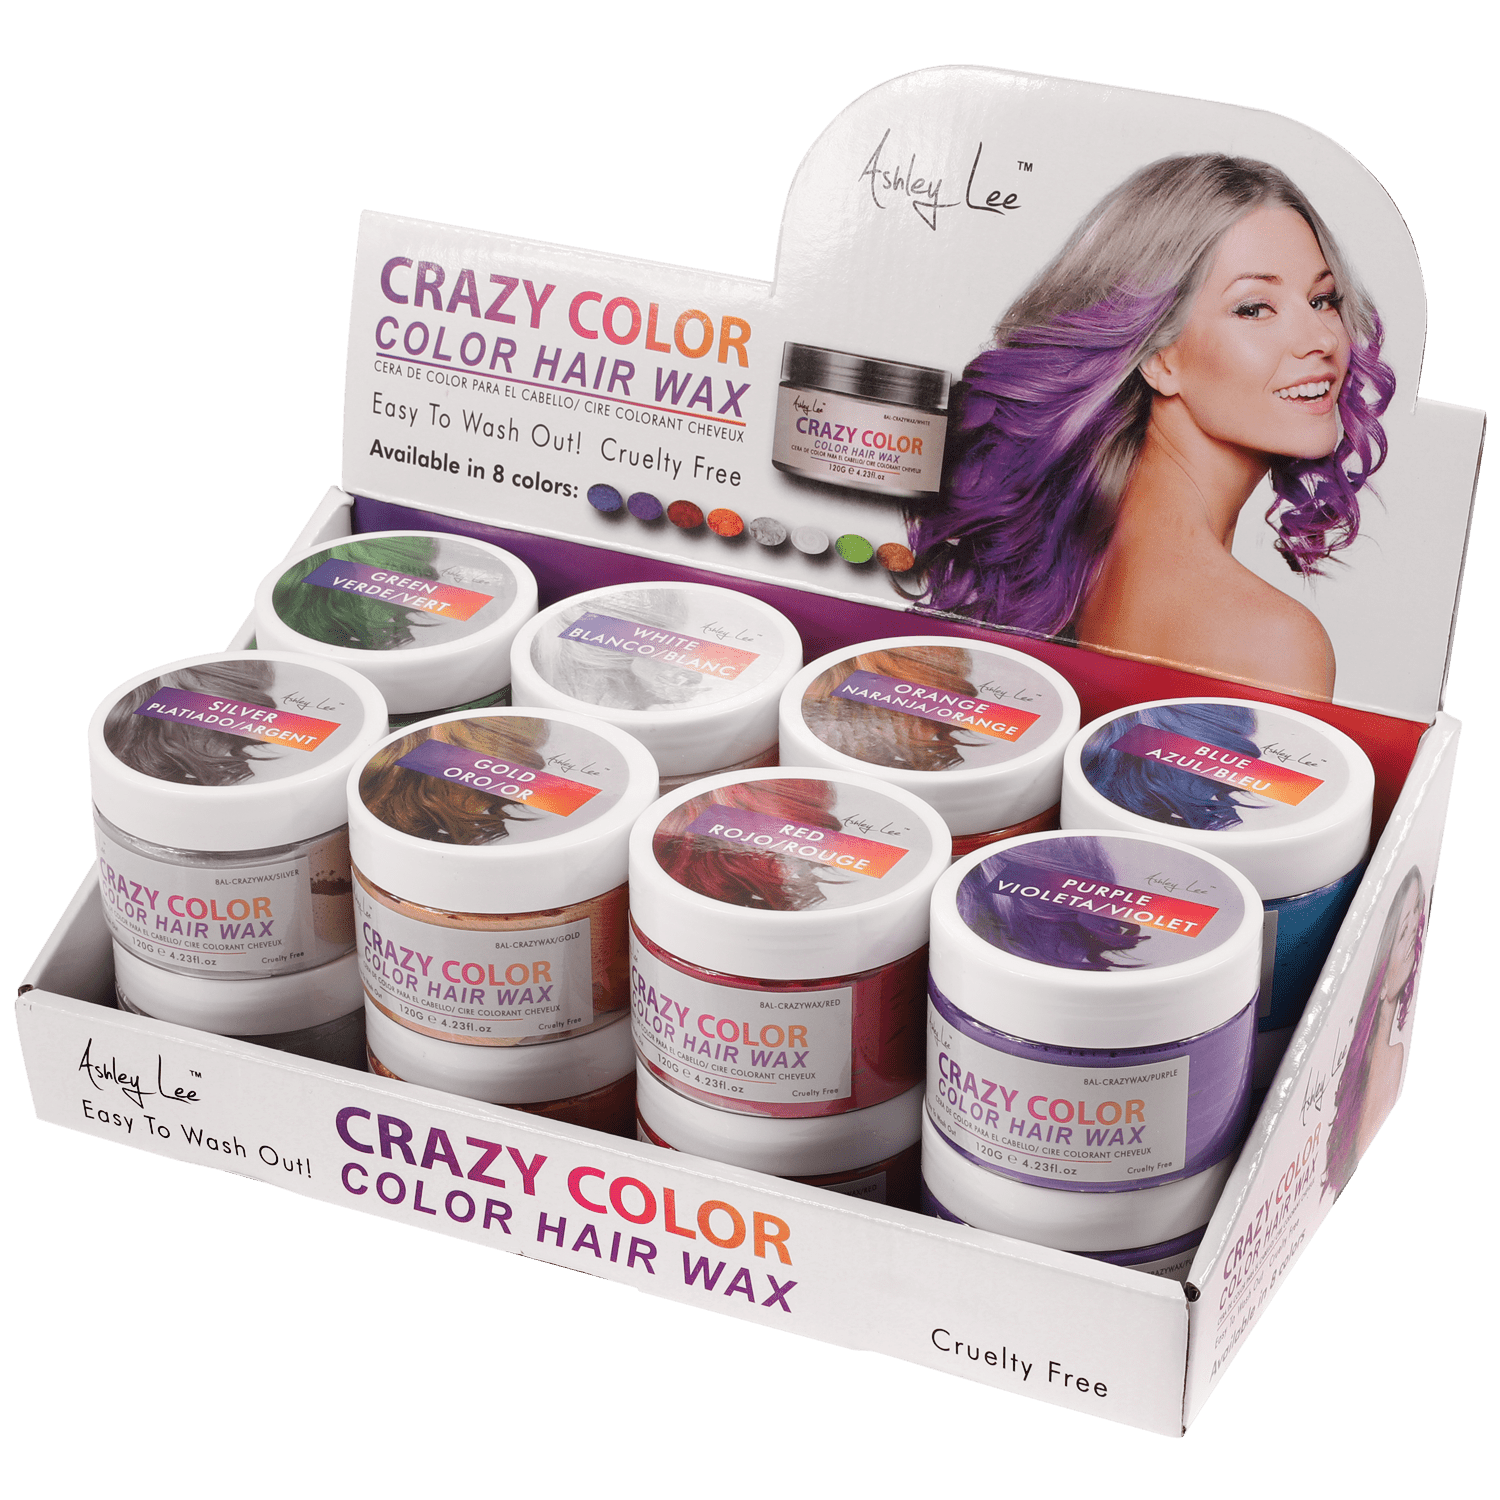 ASHLEY LEE COLOR CRAZY HAIR WAX - VIP Extensions